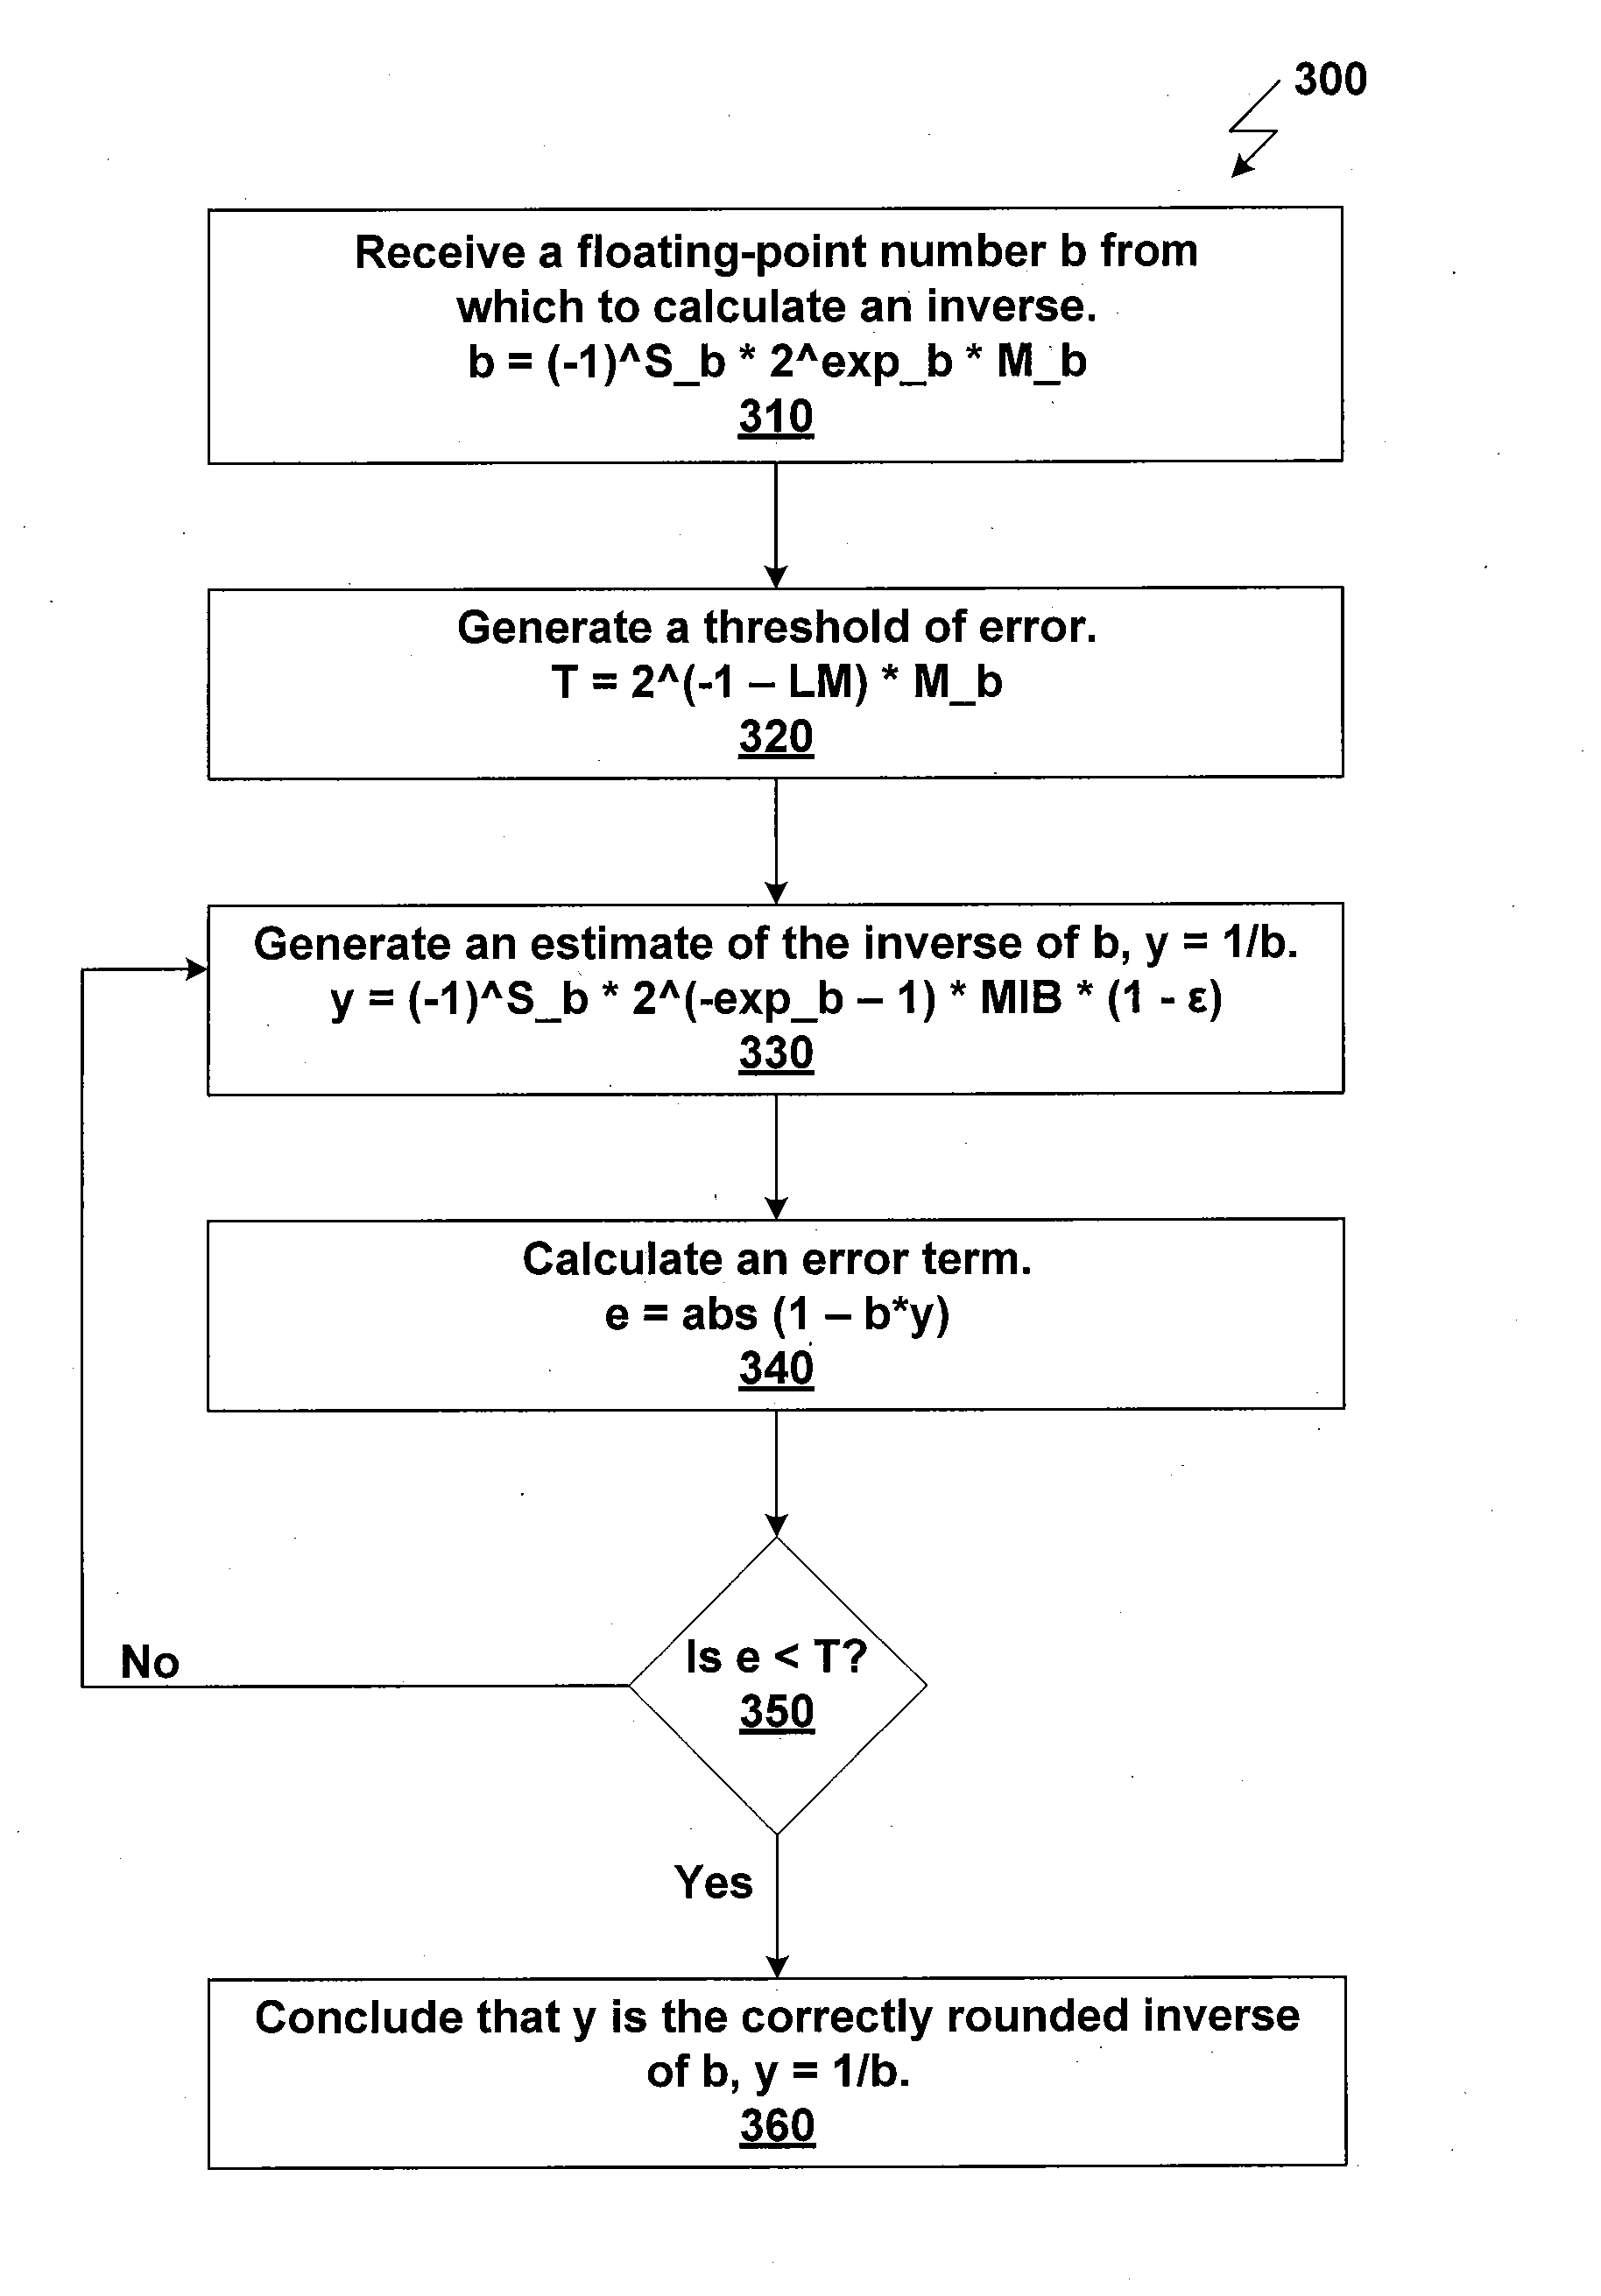 System and Method for Testing Whether a Result is Correctly Rounded